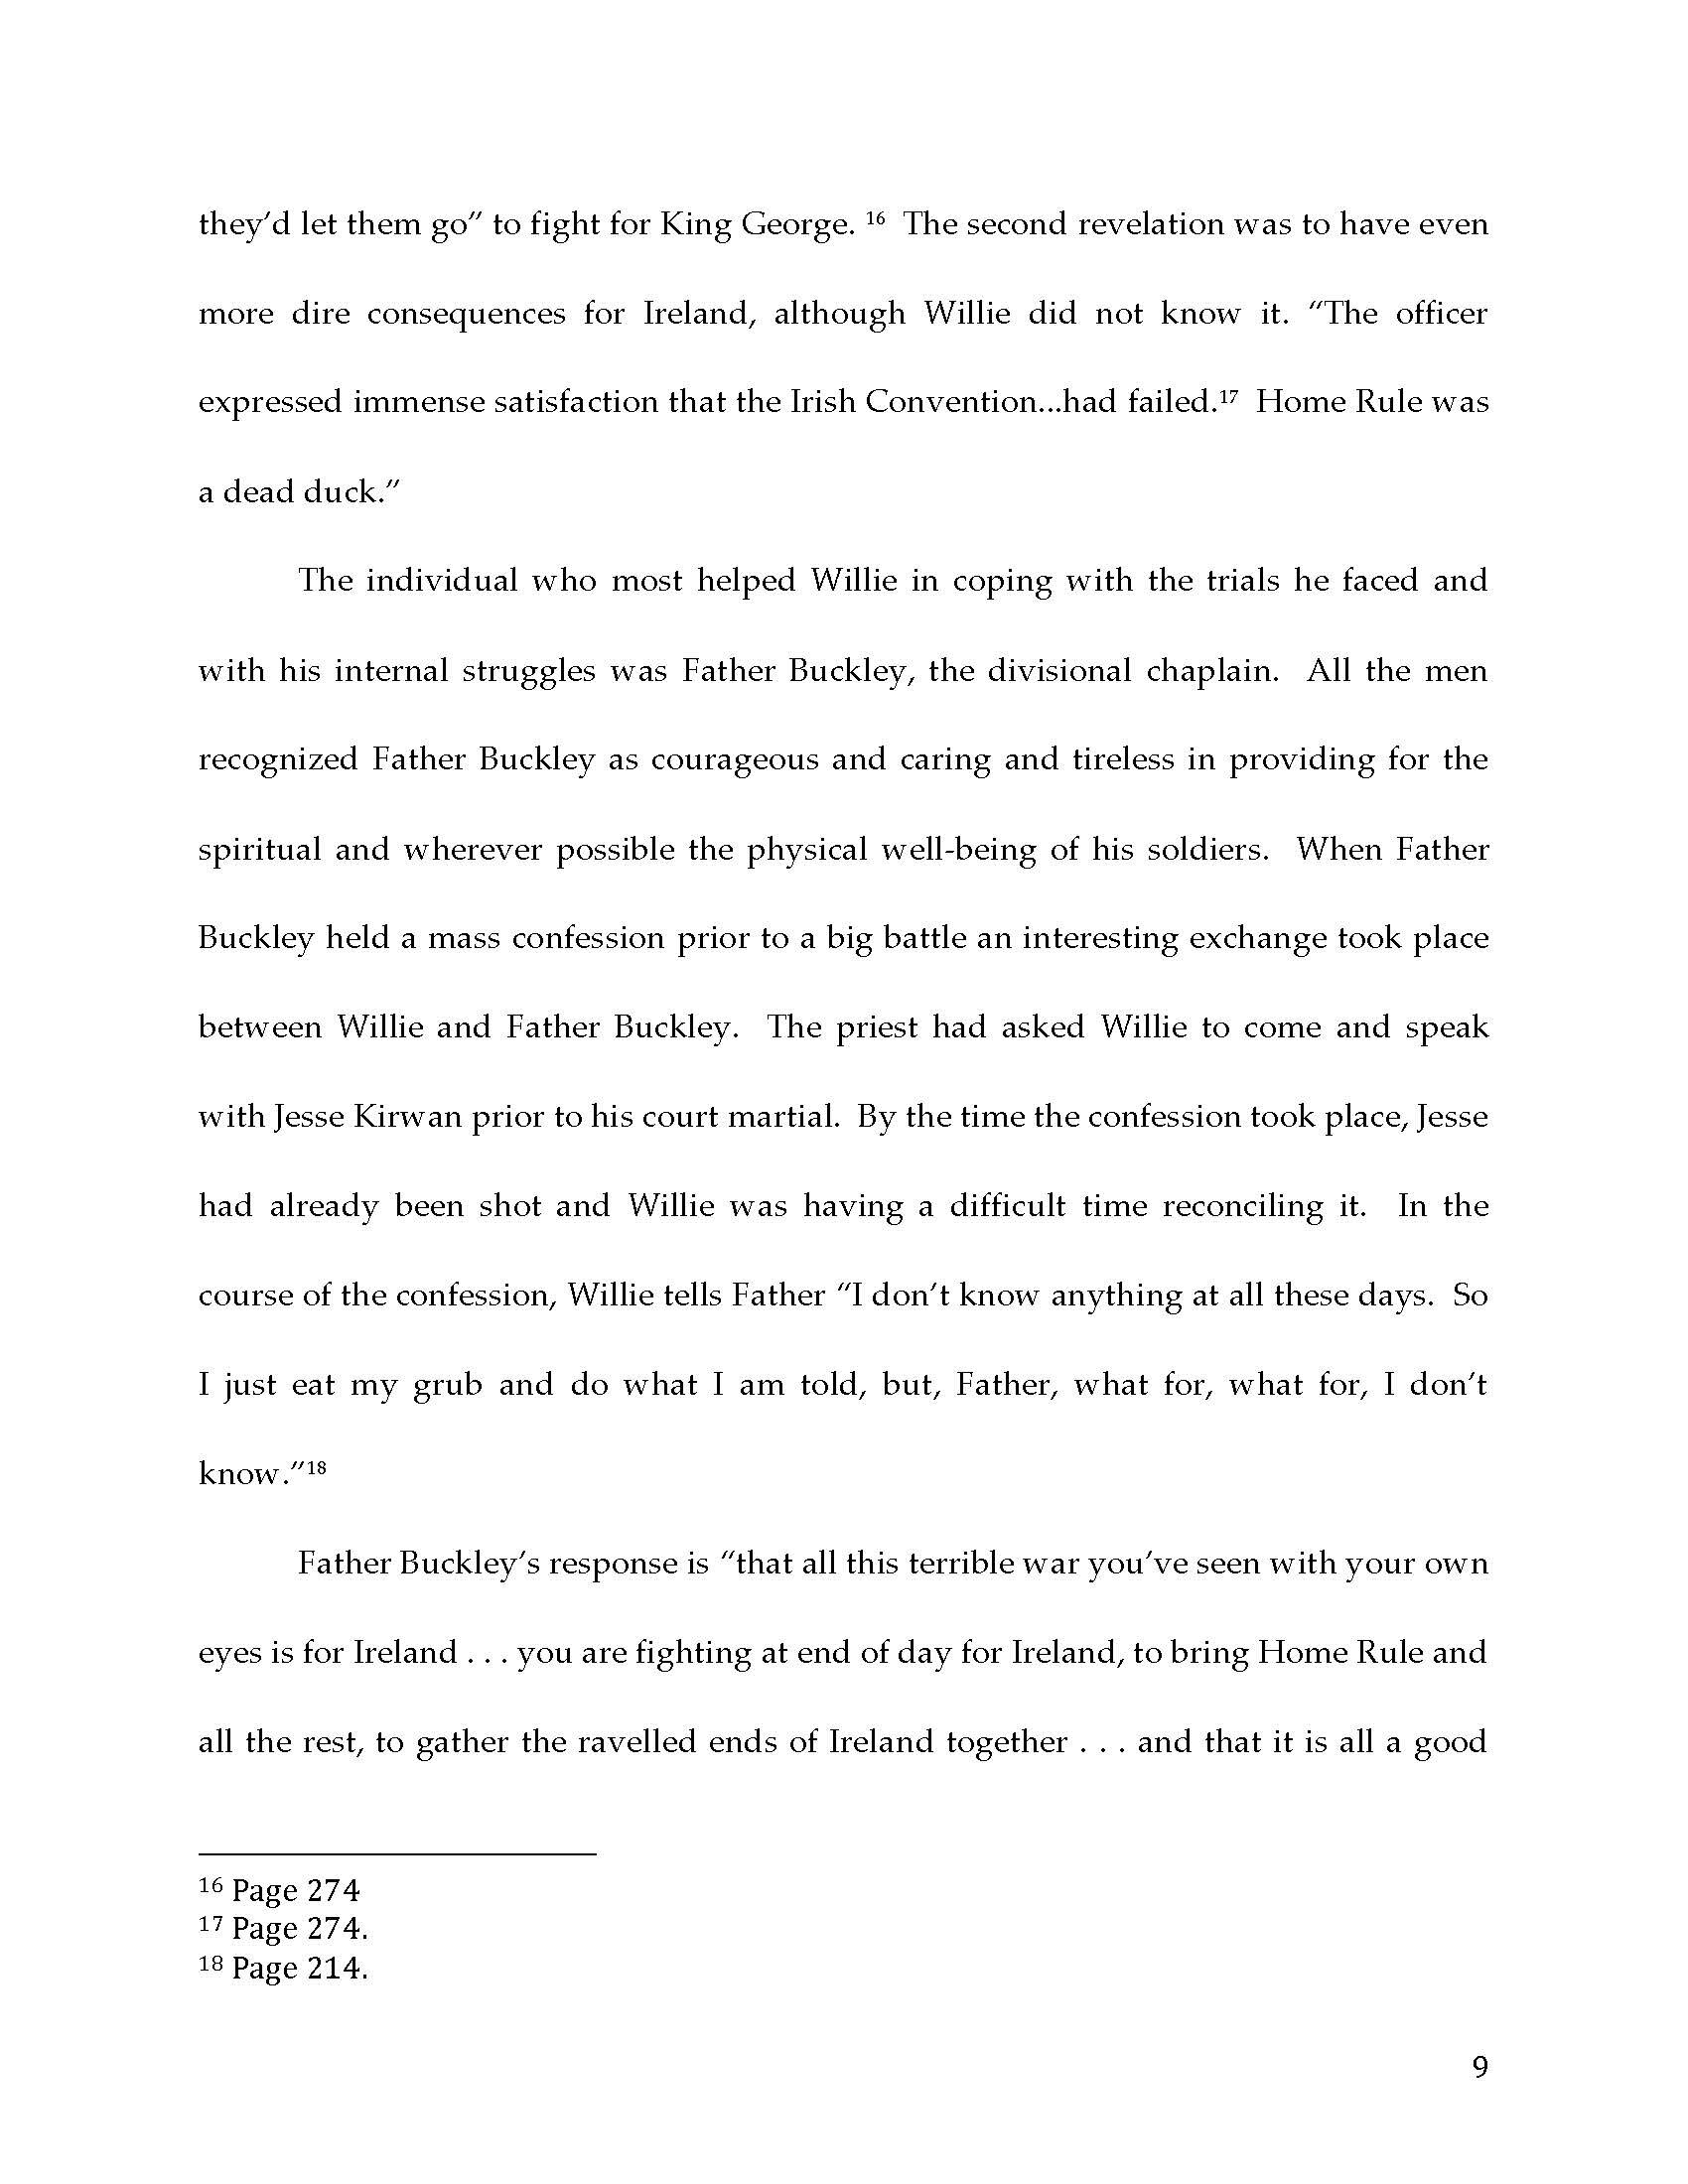 Becoming William Dunne_Paper_NAOMS_Page_09.jpg